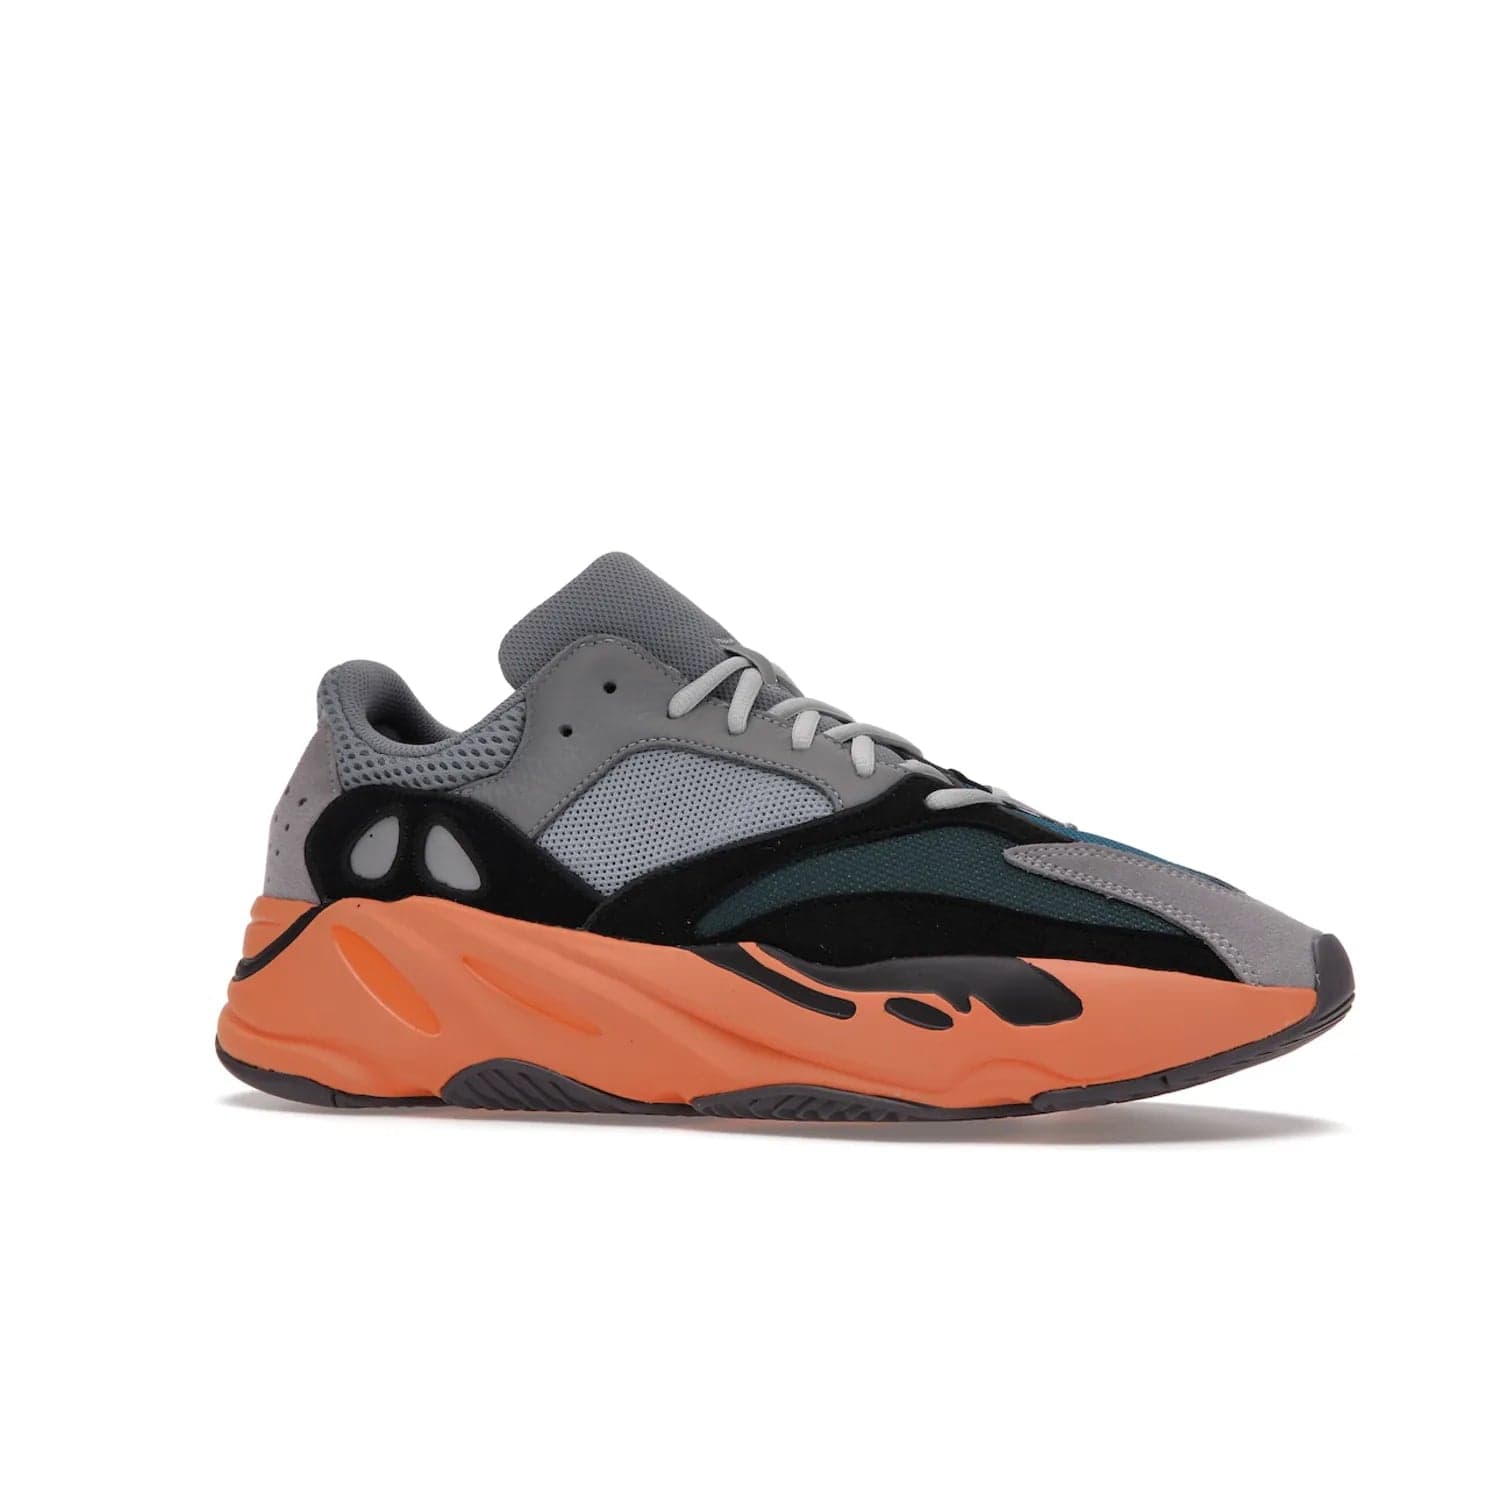 adidas Yeezy Boost 700 Wash Orange - Image 3 - Only at www.BallersClubKickz.com - Introducing the adidas Yeezy Boost 700 Wash Orange. Unique grey leather, suede, mesh upper and teal panels with a chunky Wash Orange Boost midsole. Release October 2021, make a statement today!